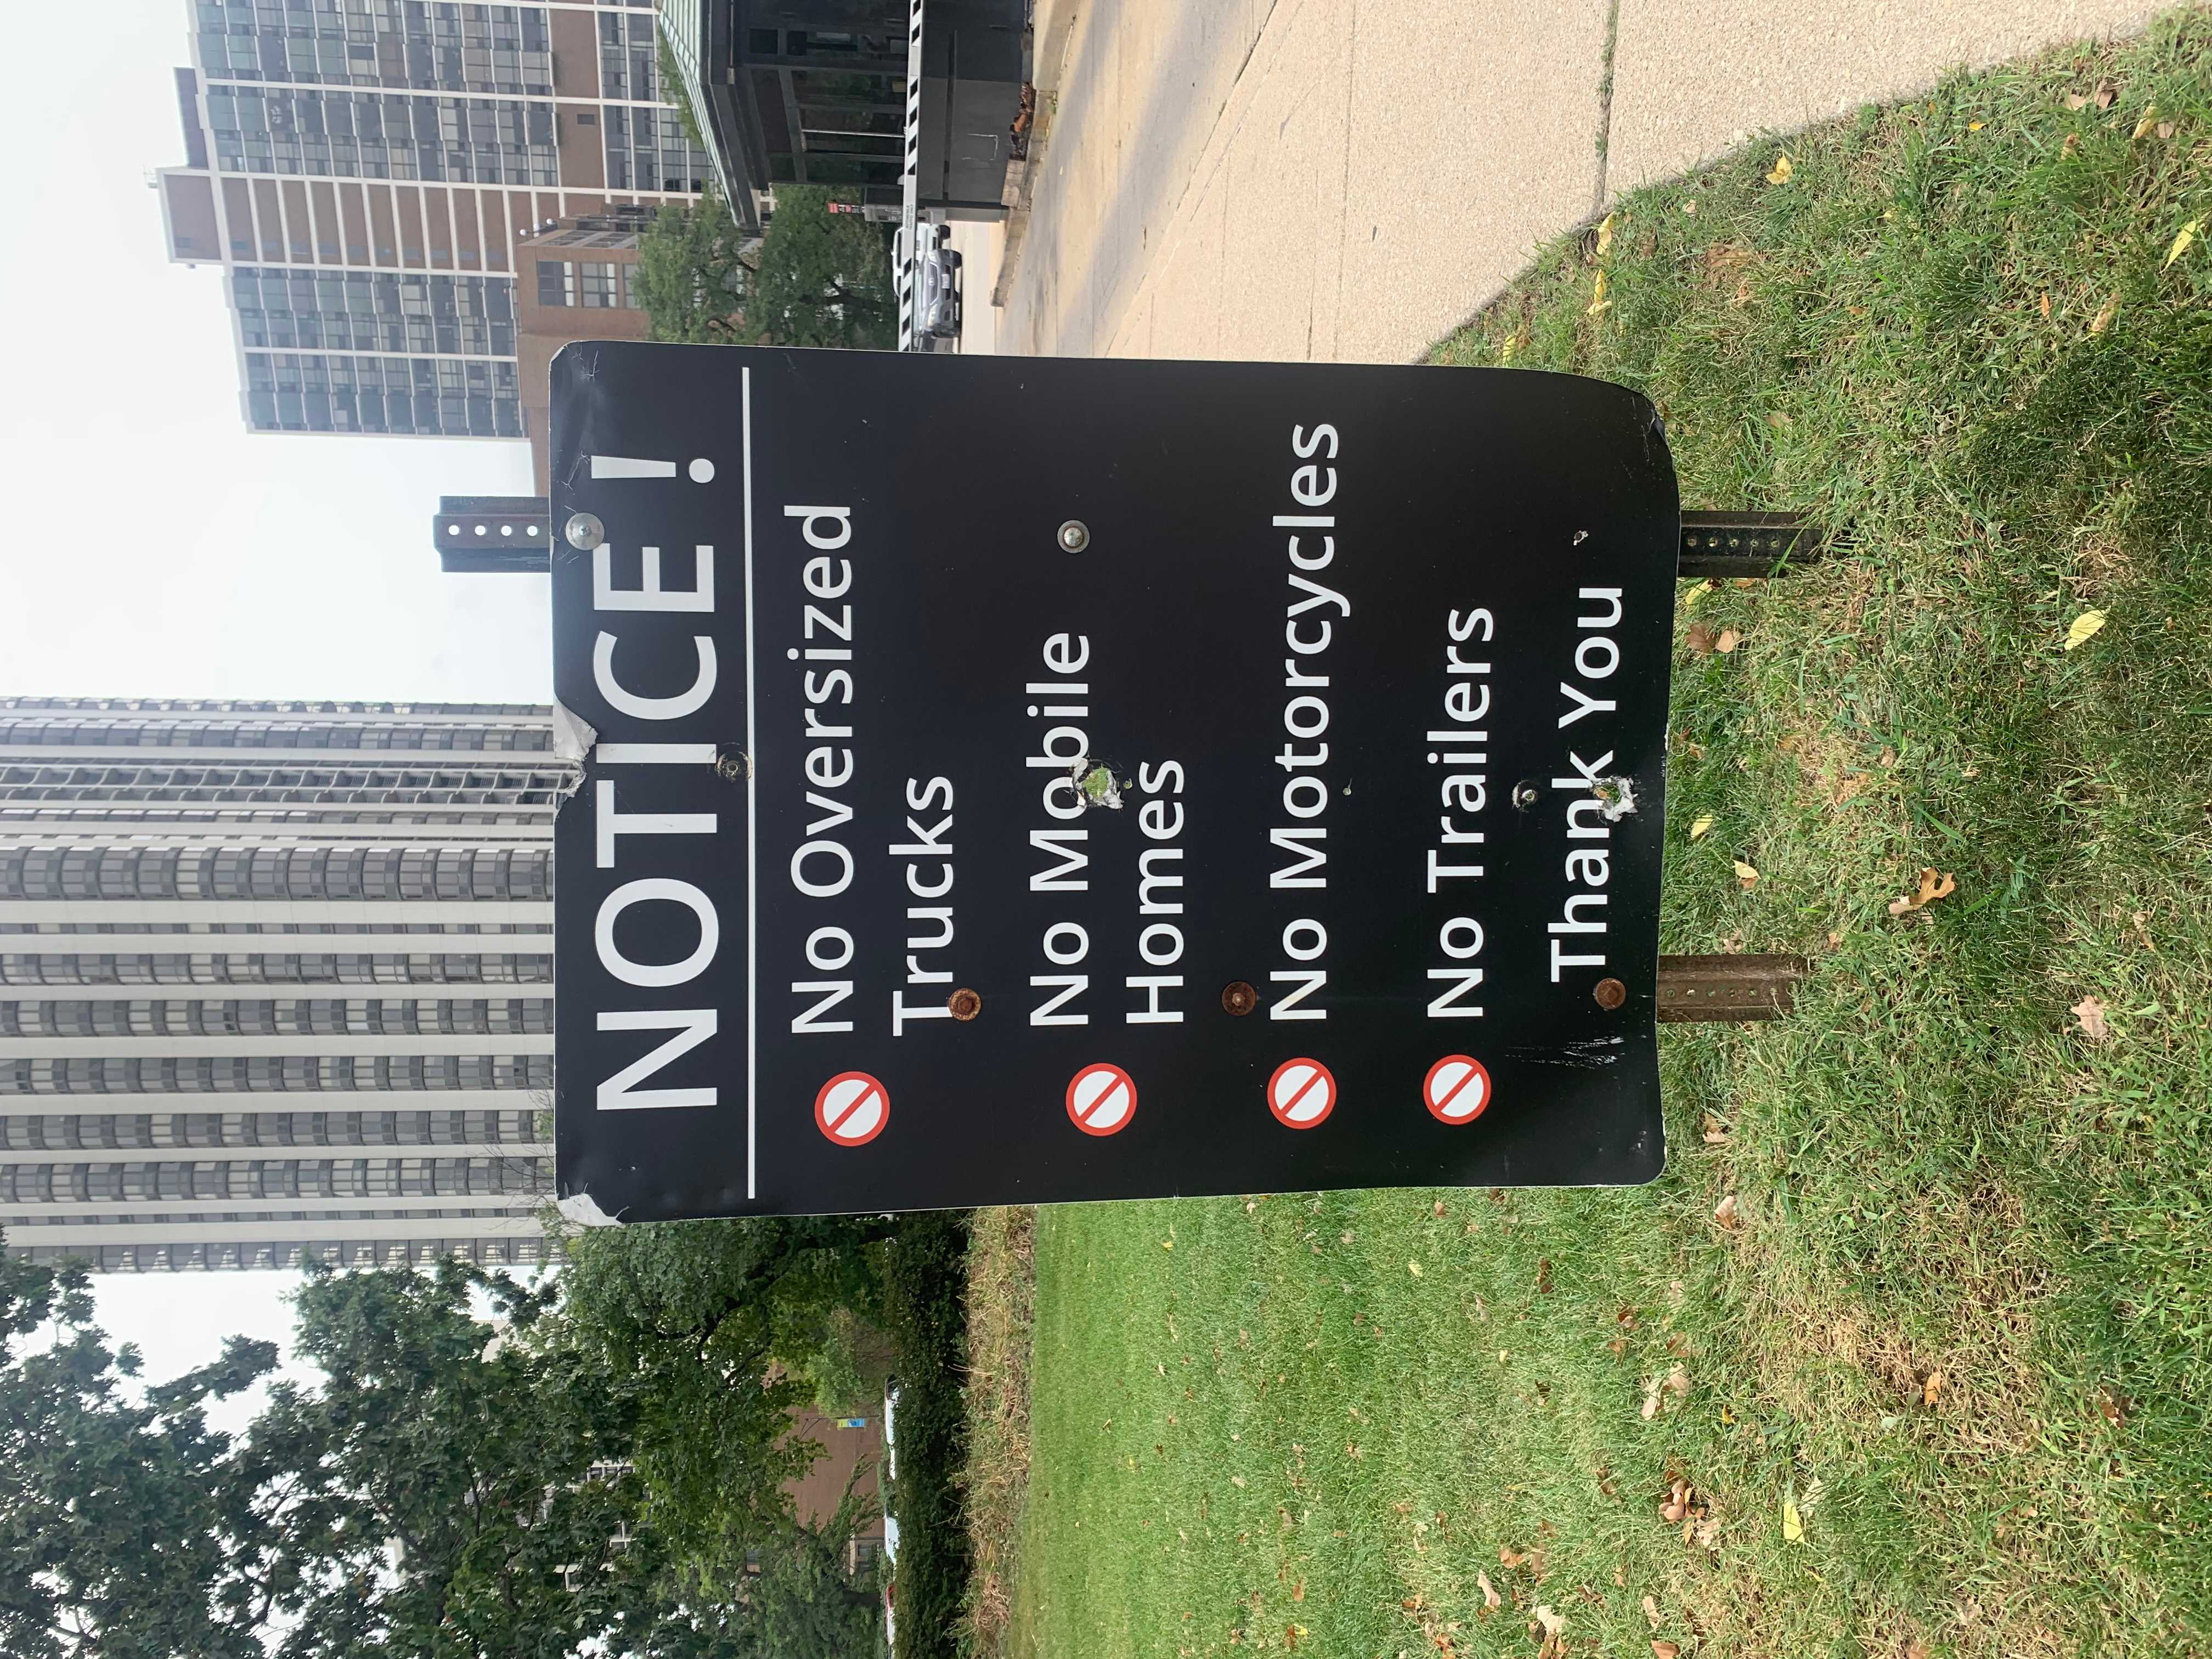 Vehicles Not Allowed (Including Chevy Bolts)